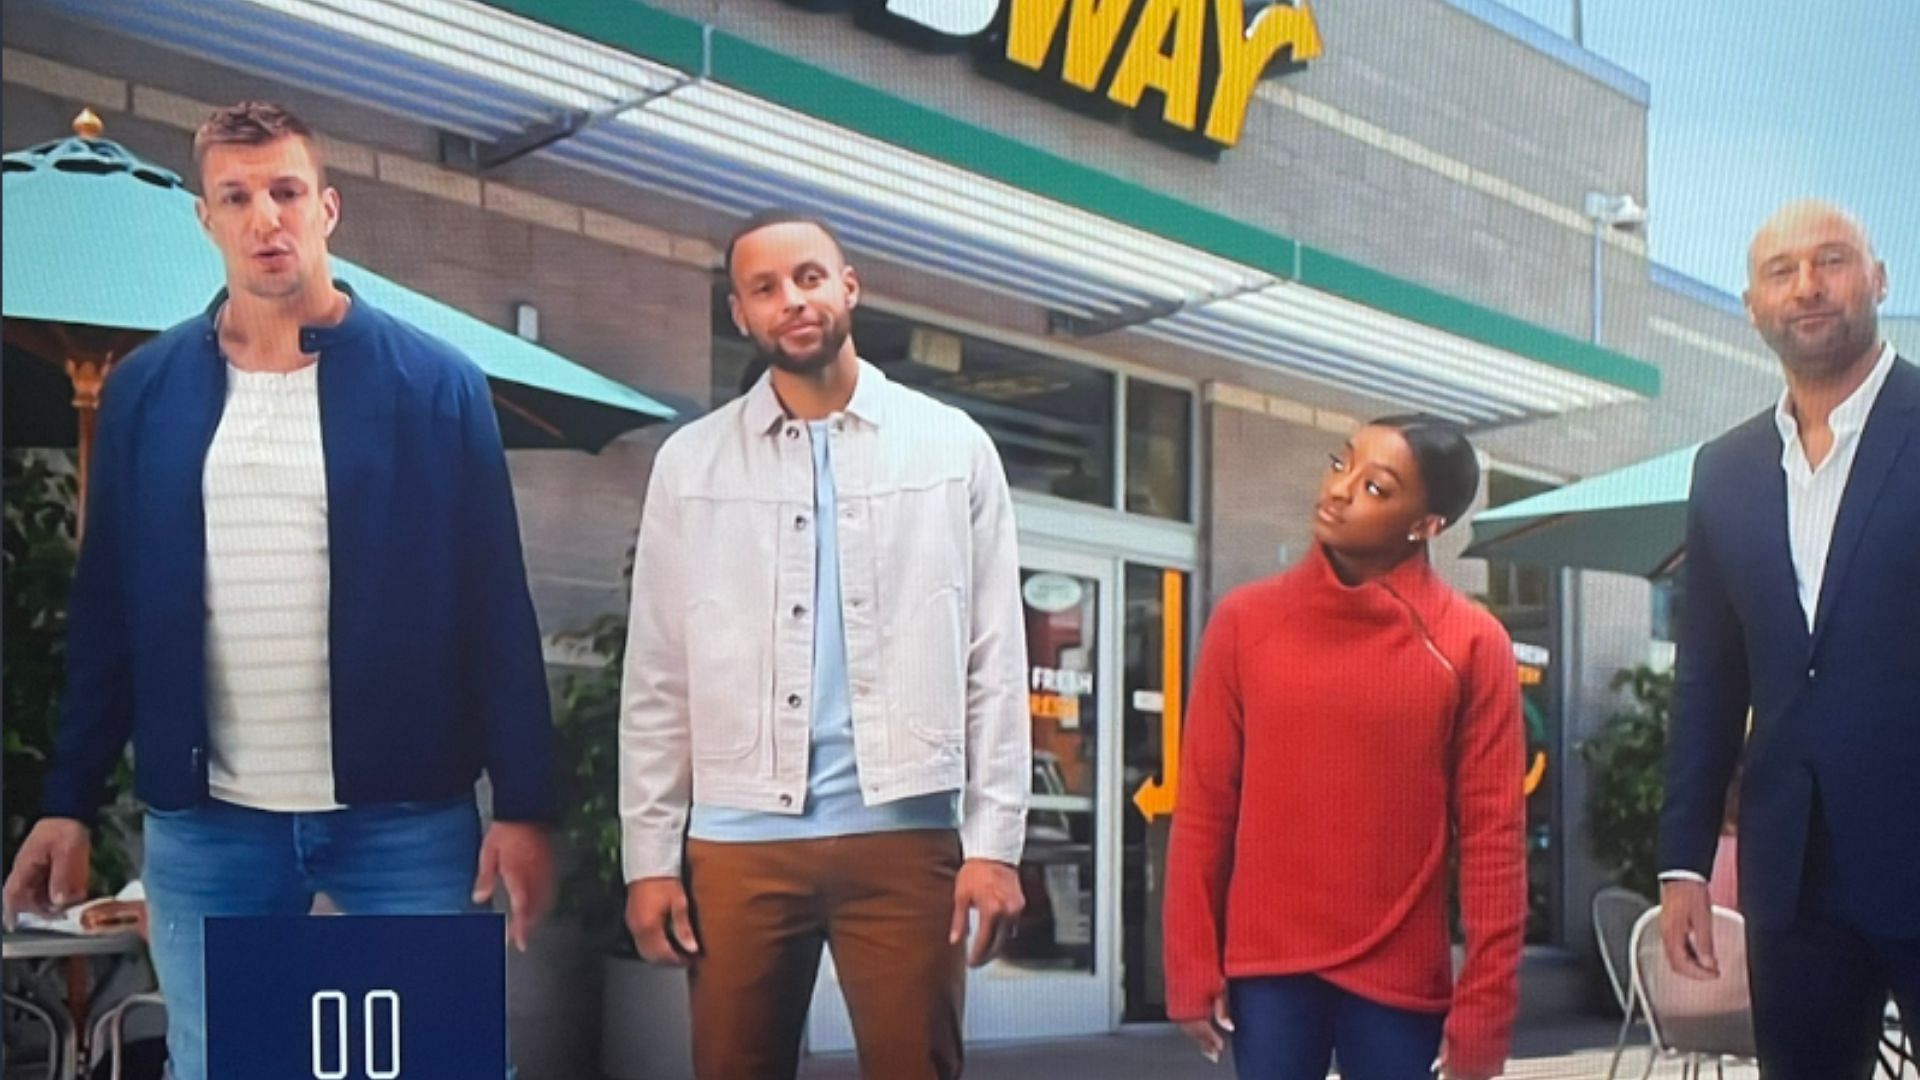 "What the h**l is Jeter doing in a subway commercial" New York